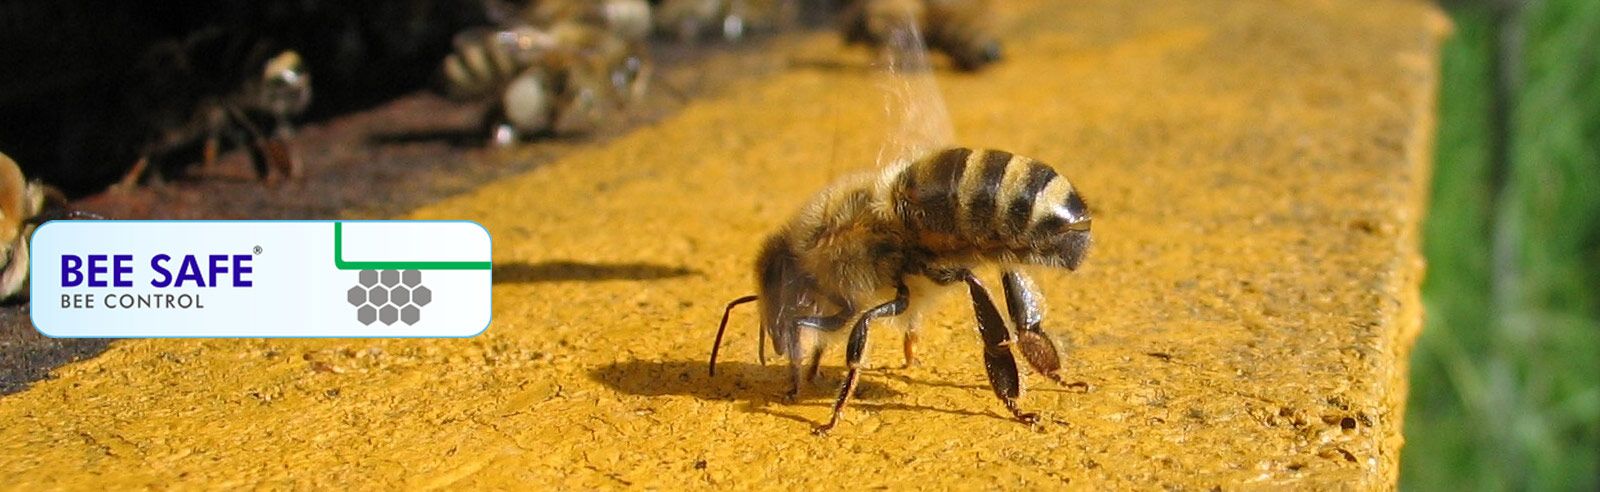 Bee treatment to control Bees